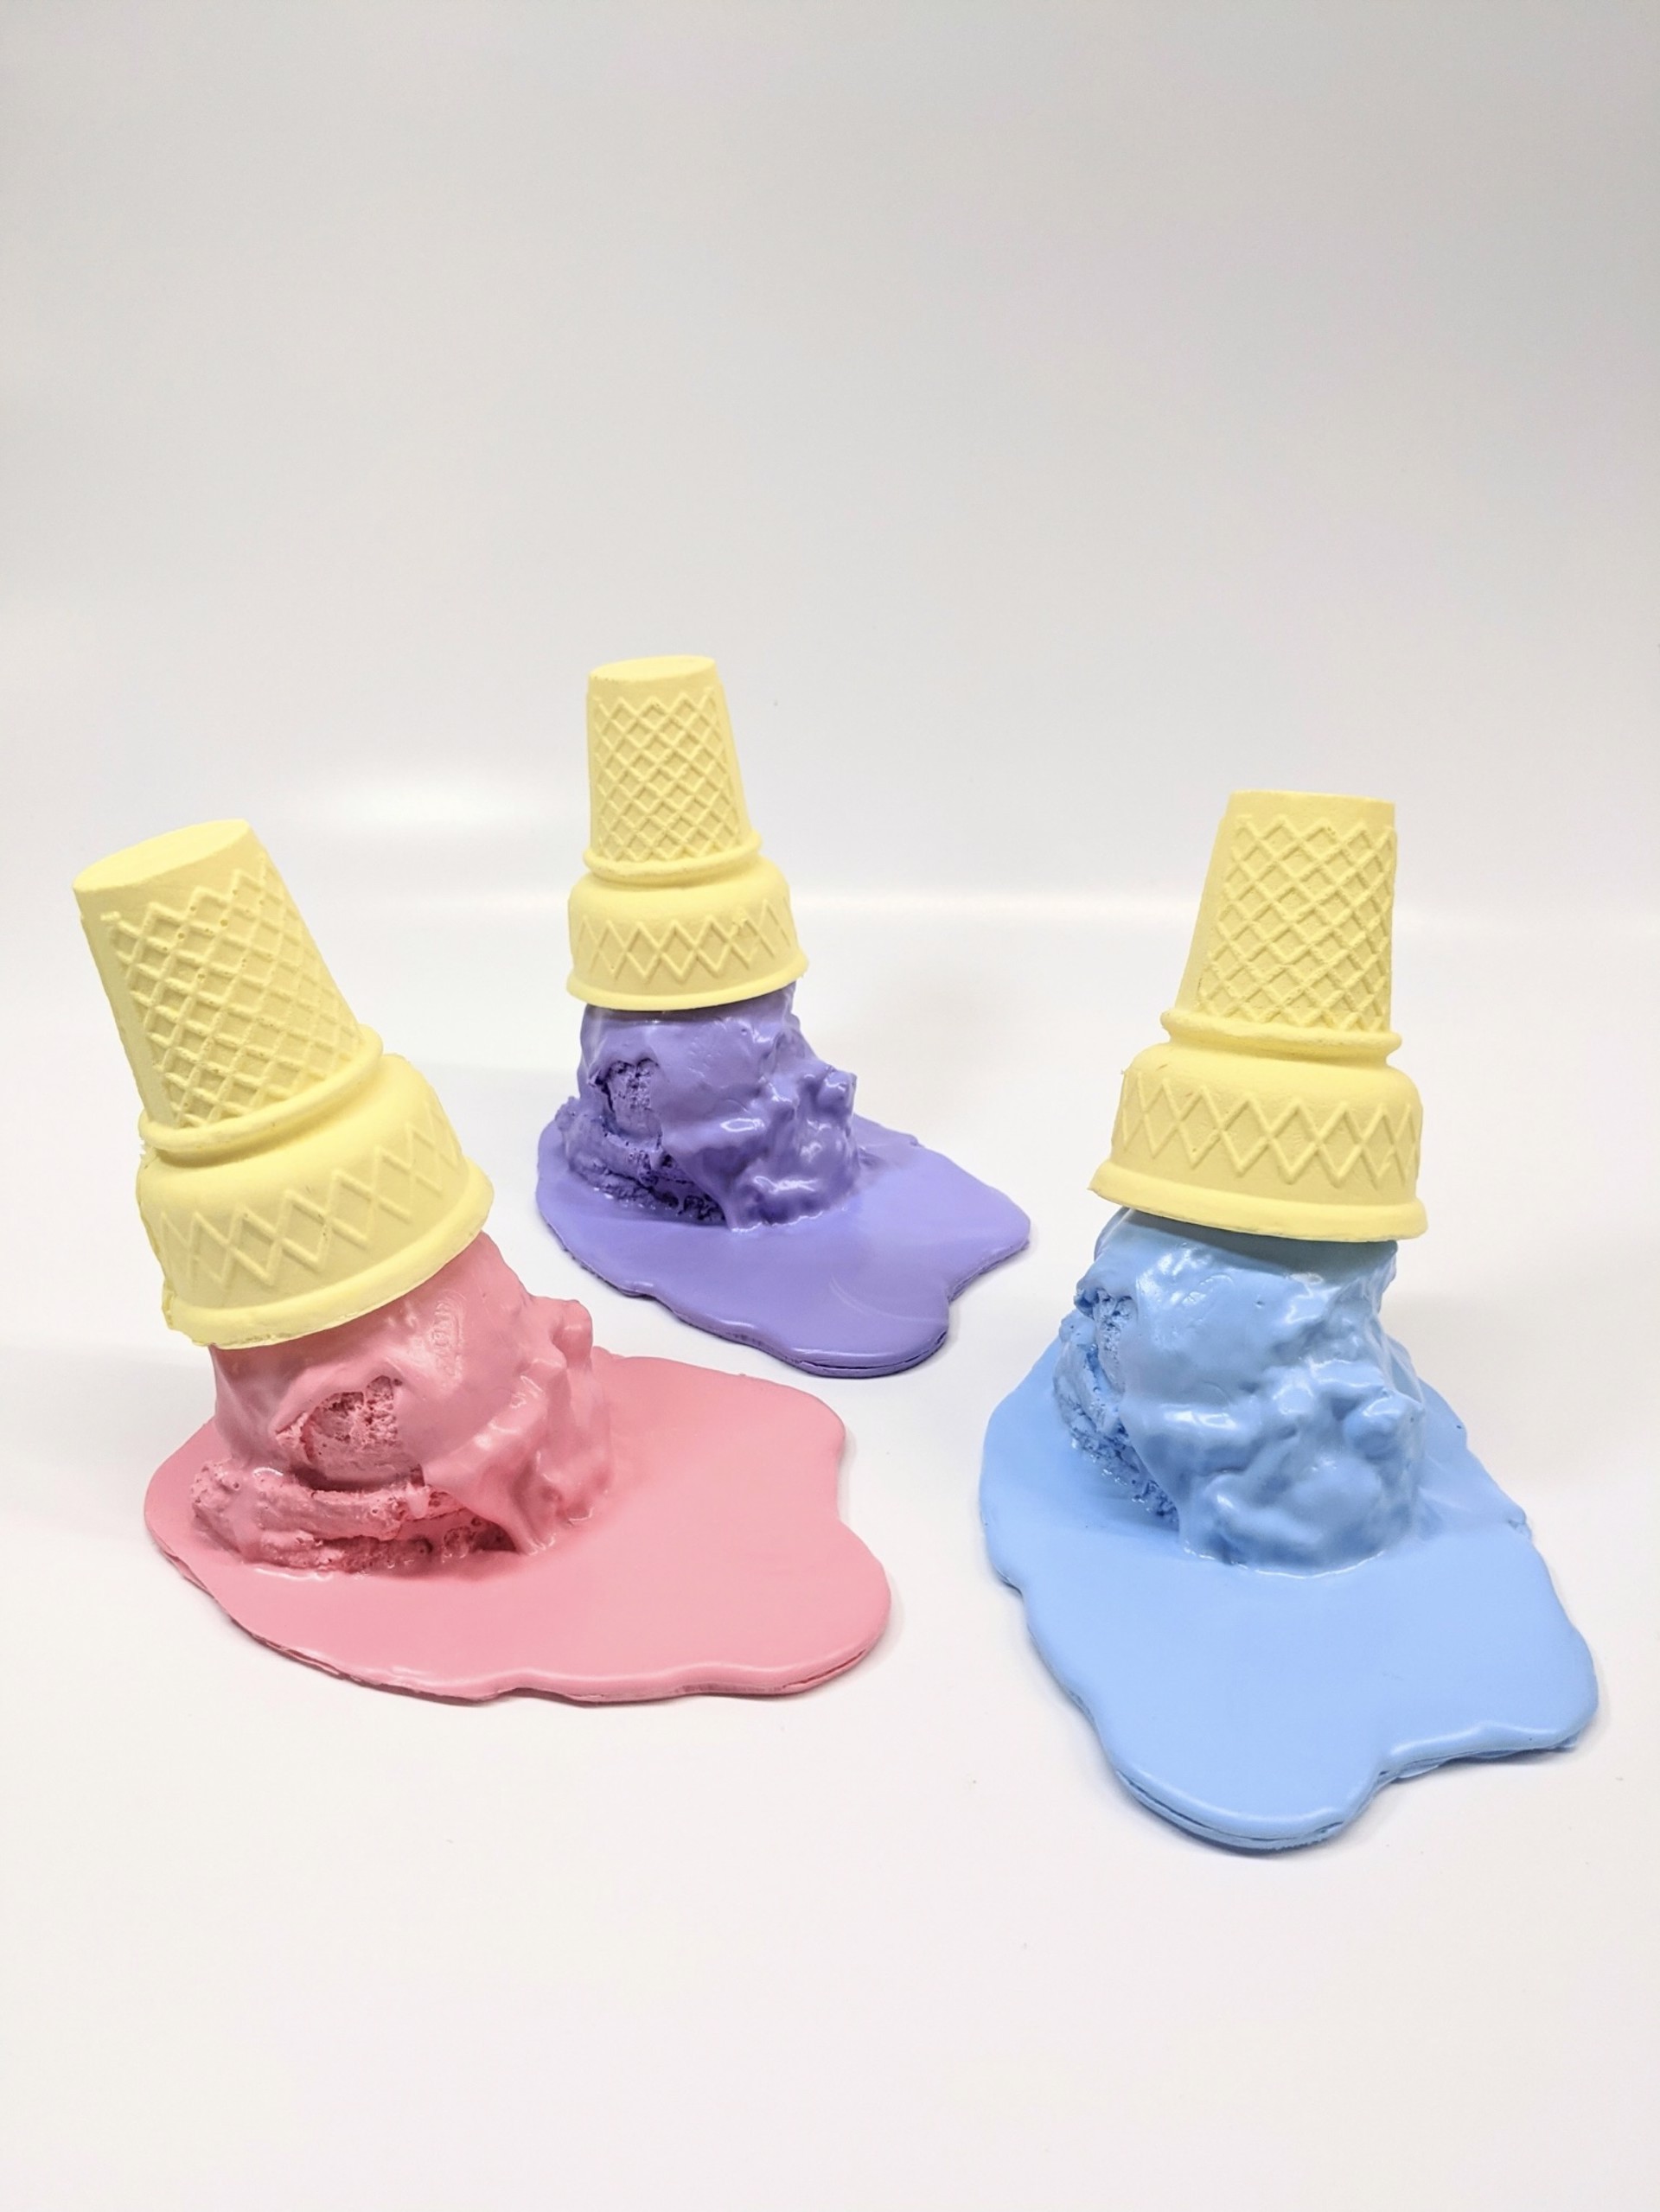 Melty Puddle Scoop Flat Cone #3 by Jourdan Joly